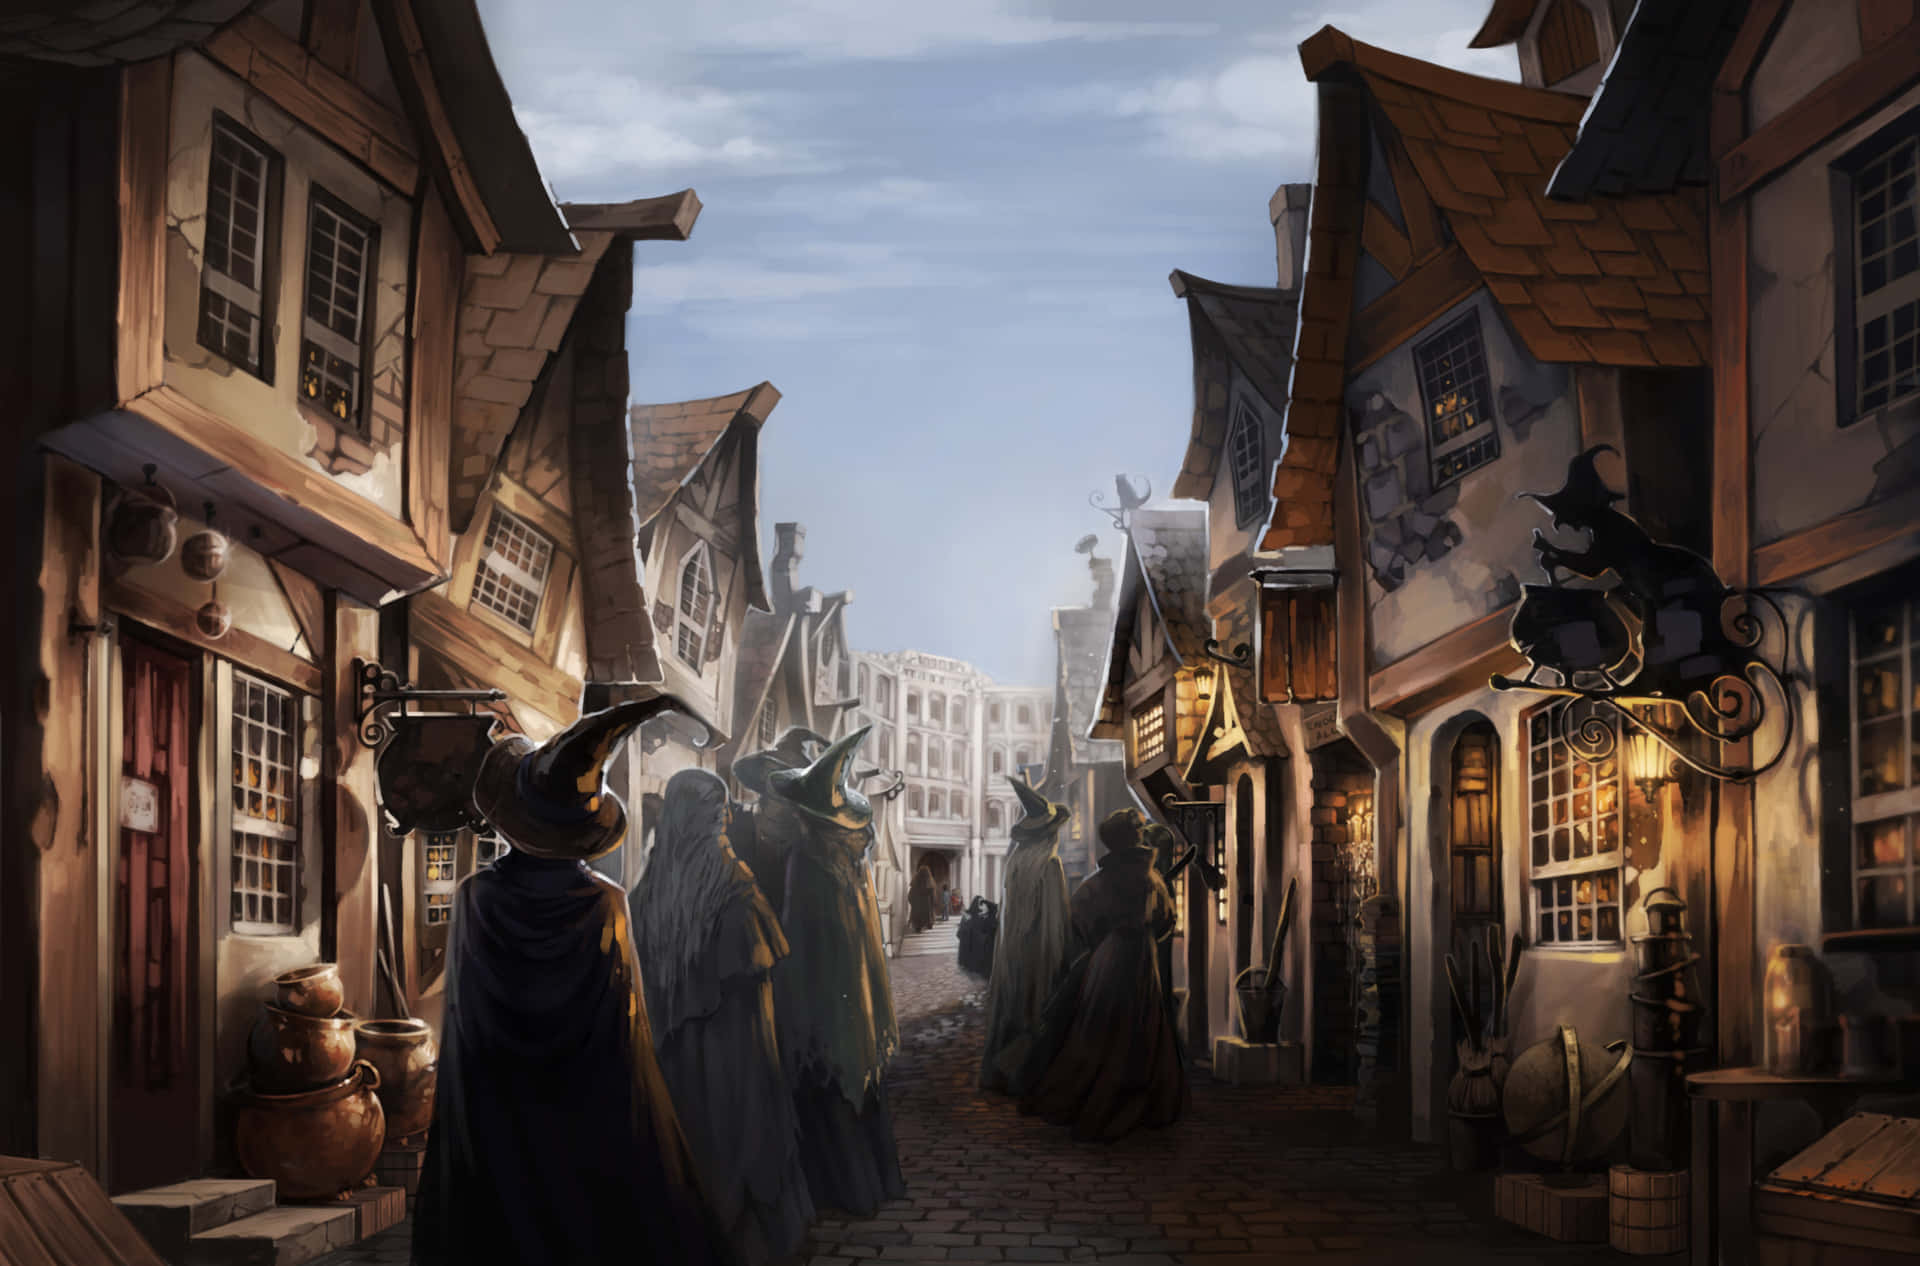 The Leaky Cauldron - a traditional pub and inn located at the entrance to Diagon Alley Wallpaper